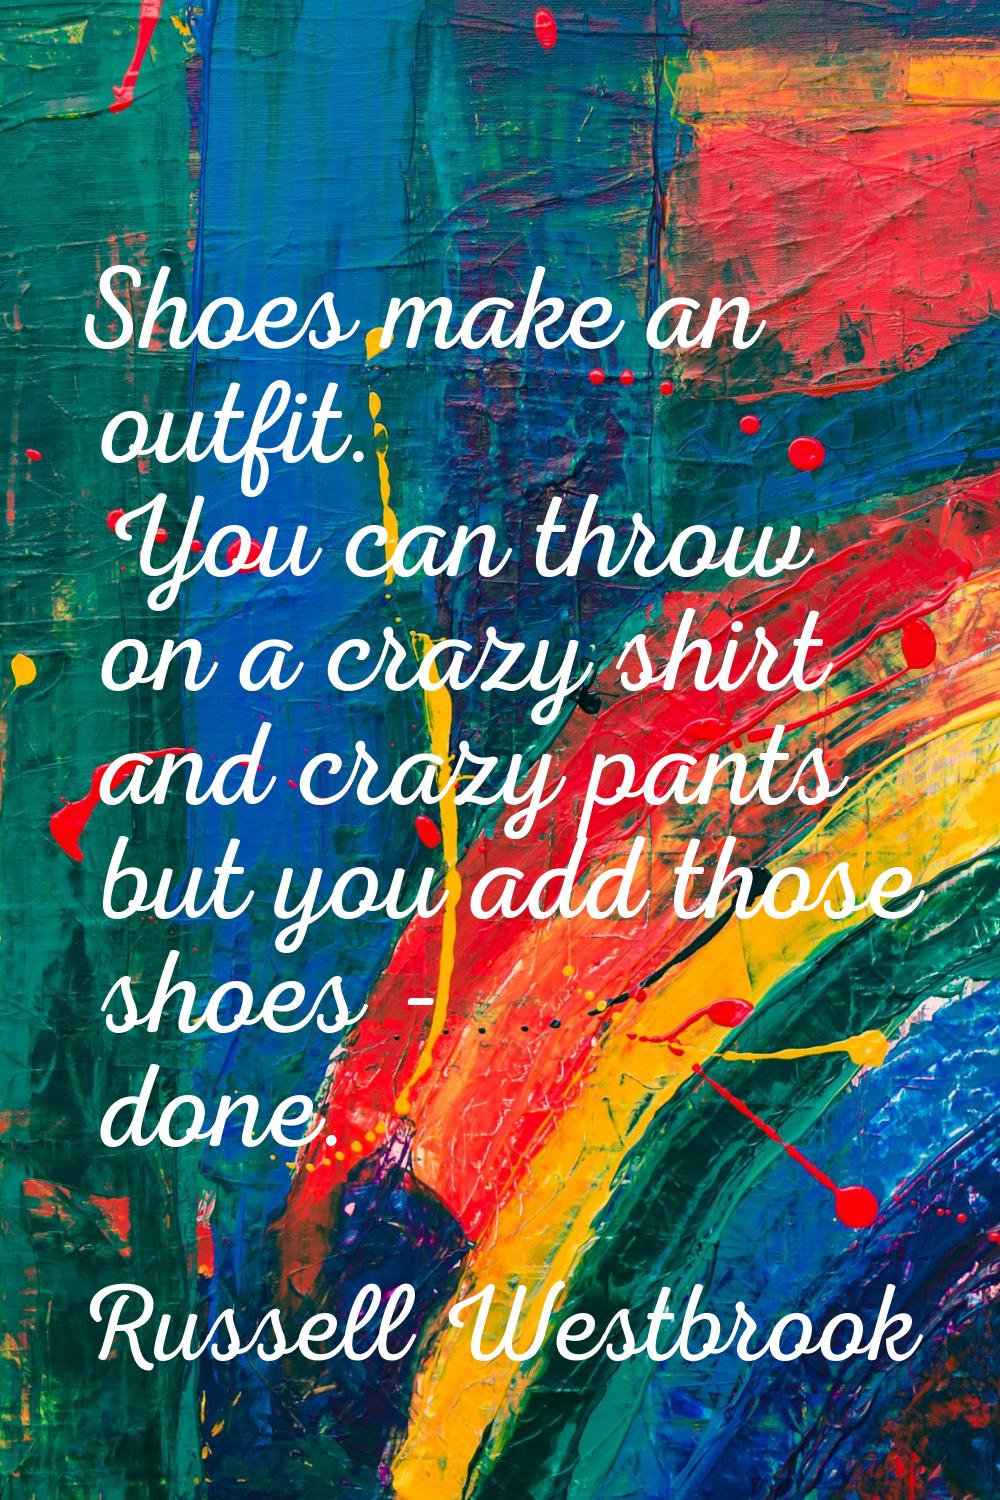 Shoes make an outfit. You can throw on a crazy shirt and crazy pants but you add those shoes - done